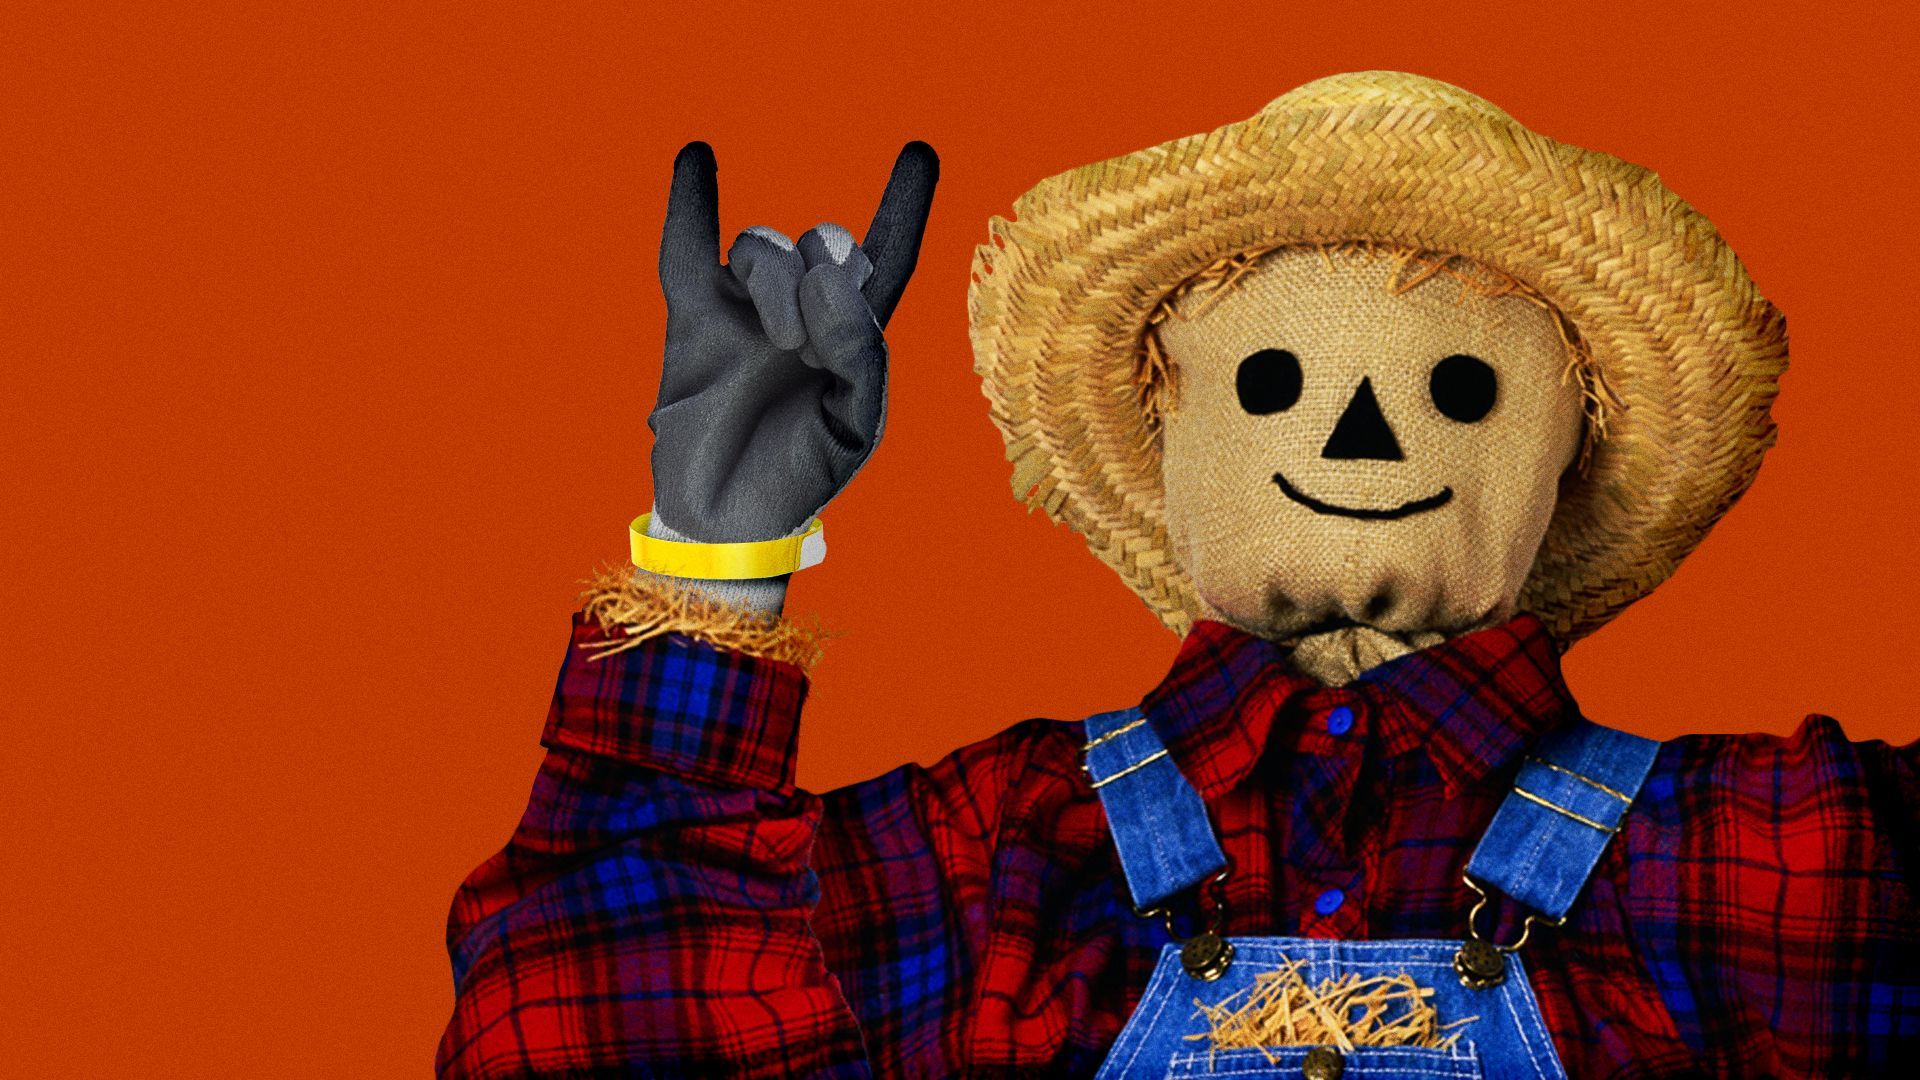 Illustration of a scarecrow throwing up the "rock on" hand symbol and wearing an event wristband. 